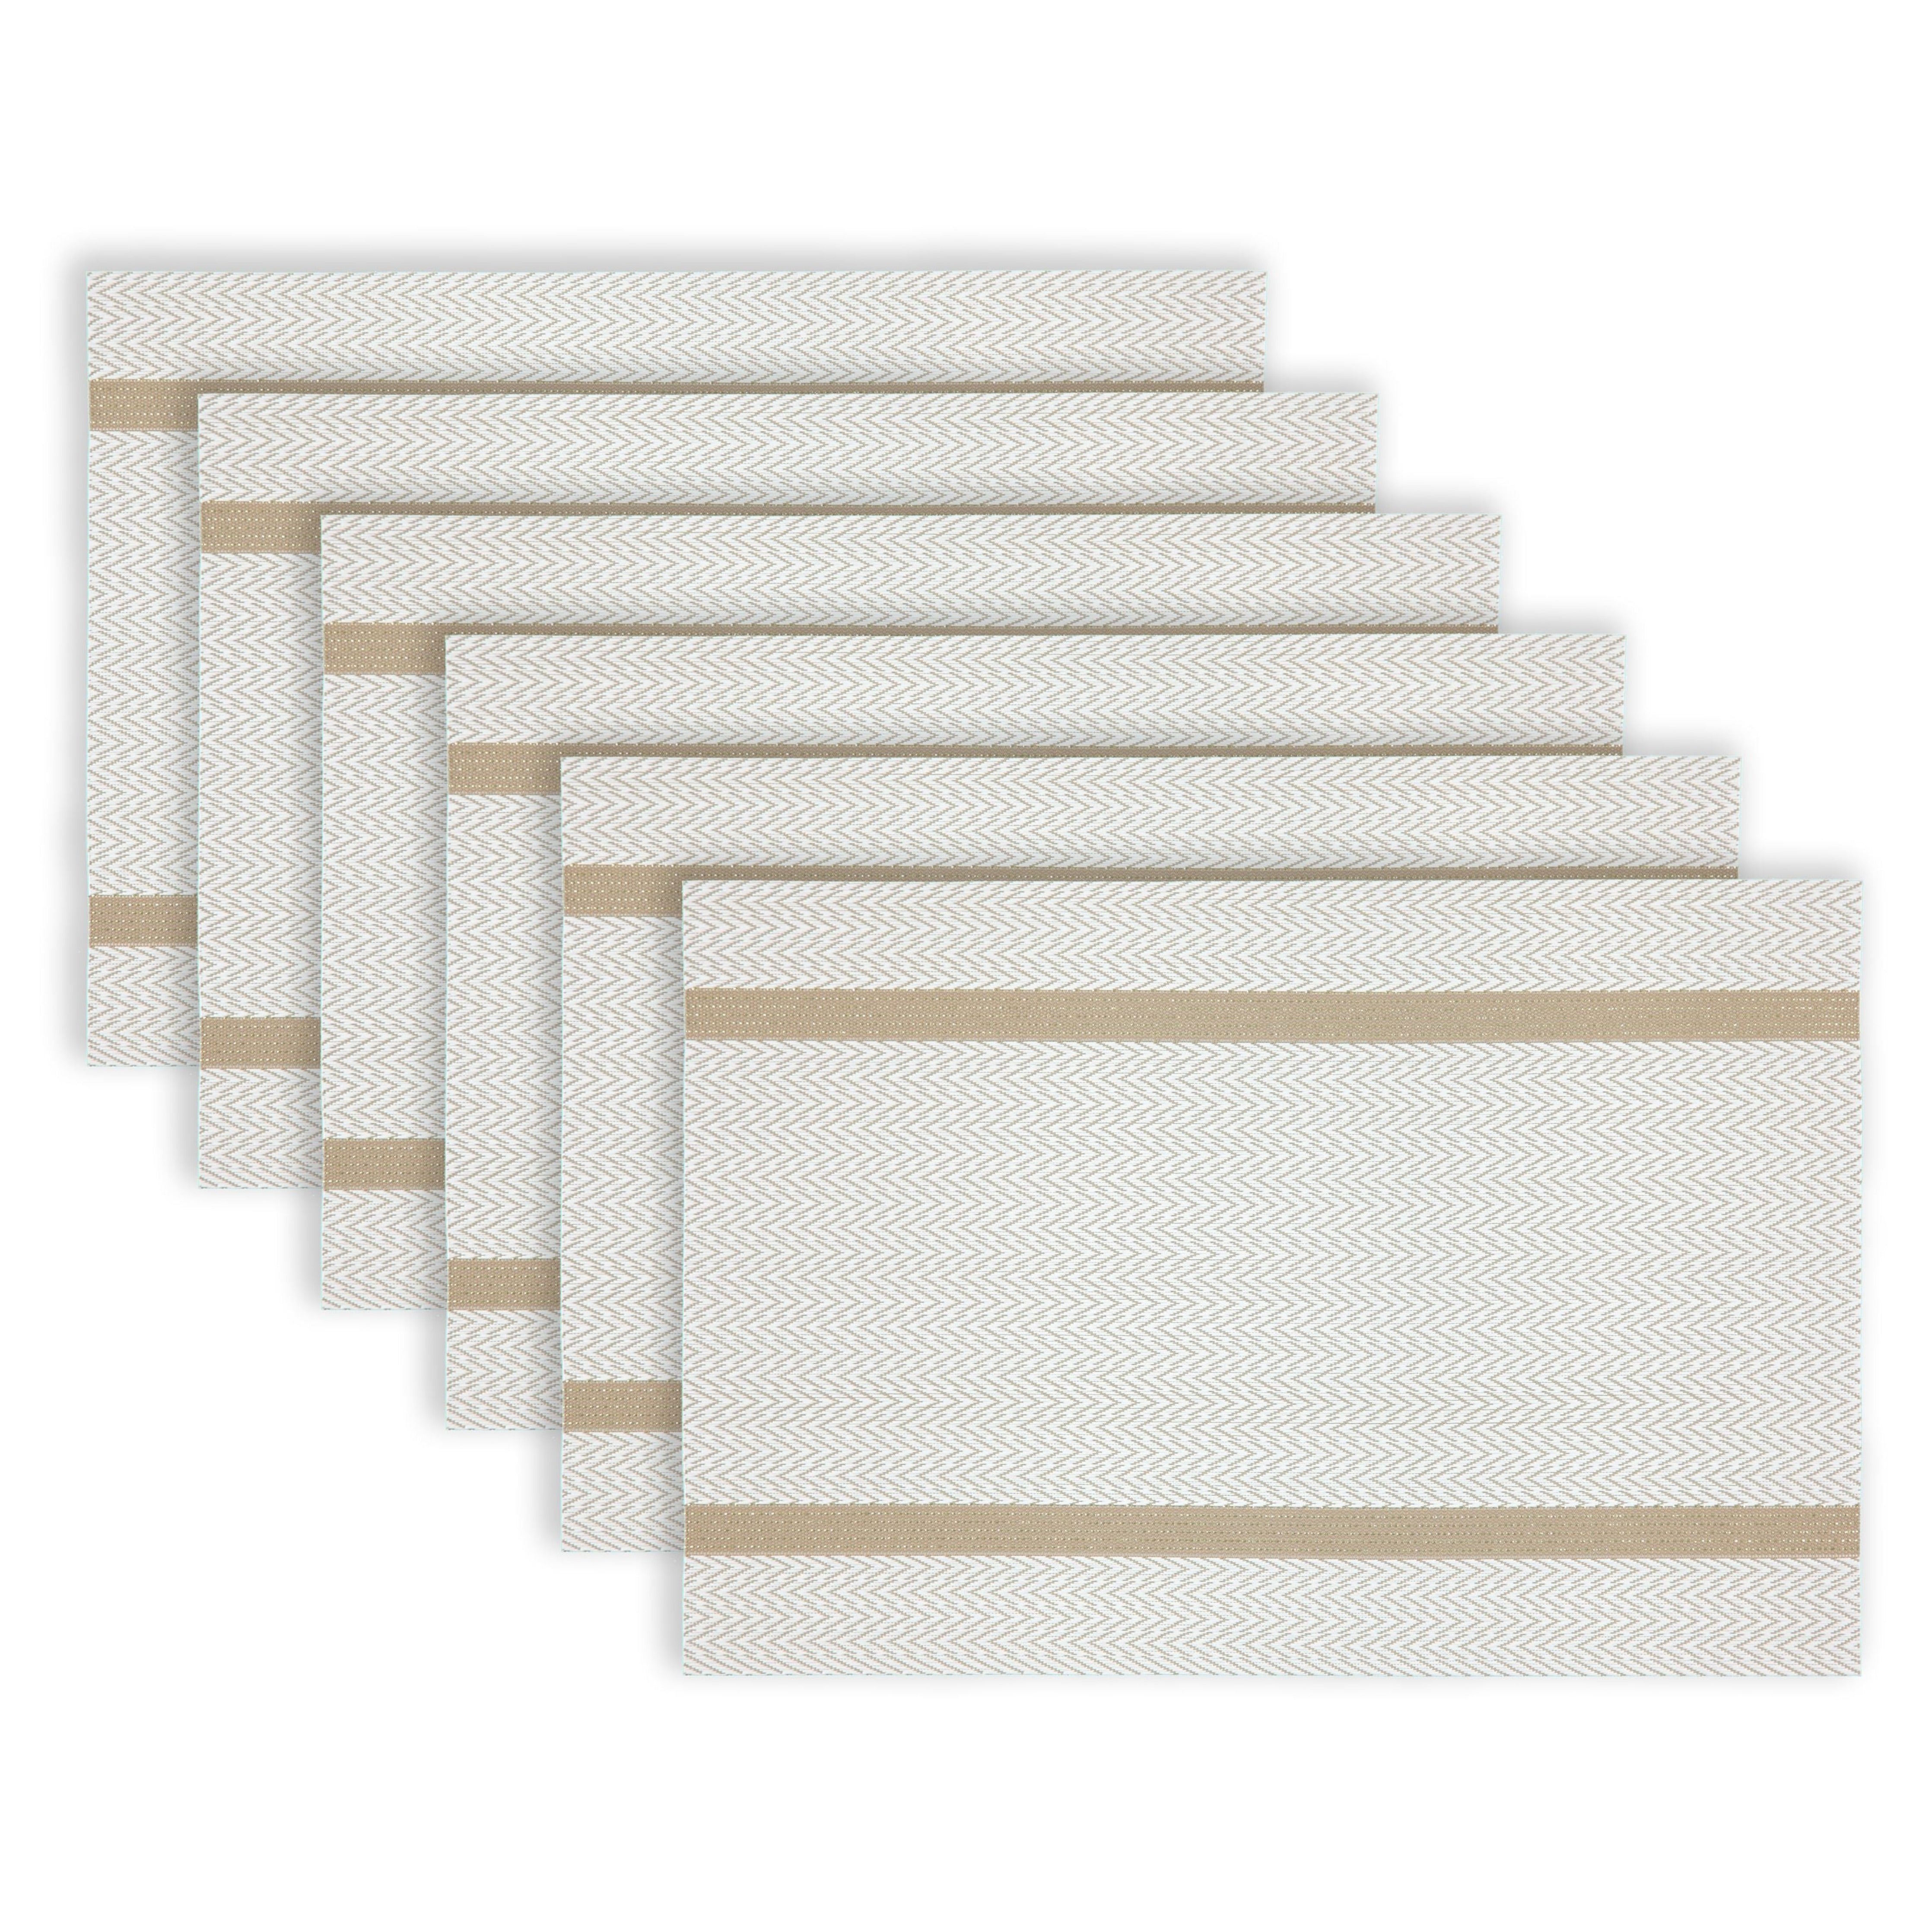 Dainty Home Annandale Woven Texteline Textured Design Reversible 12" x 18" Rectangular Placemats Set of 6